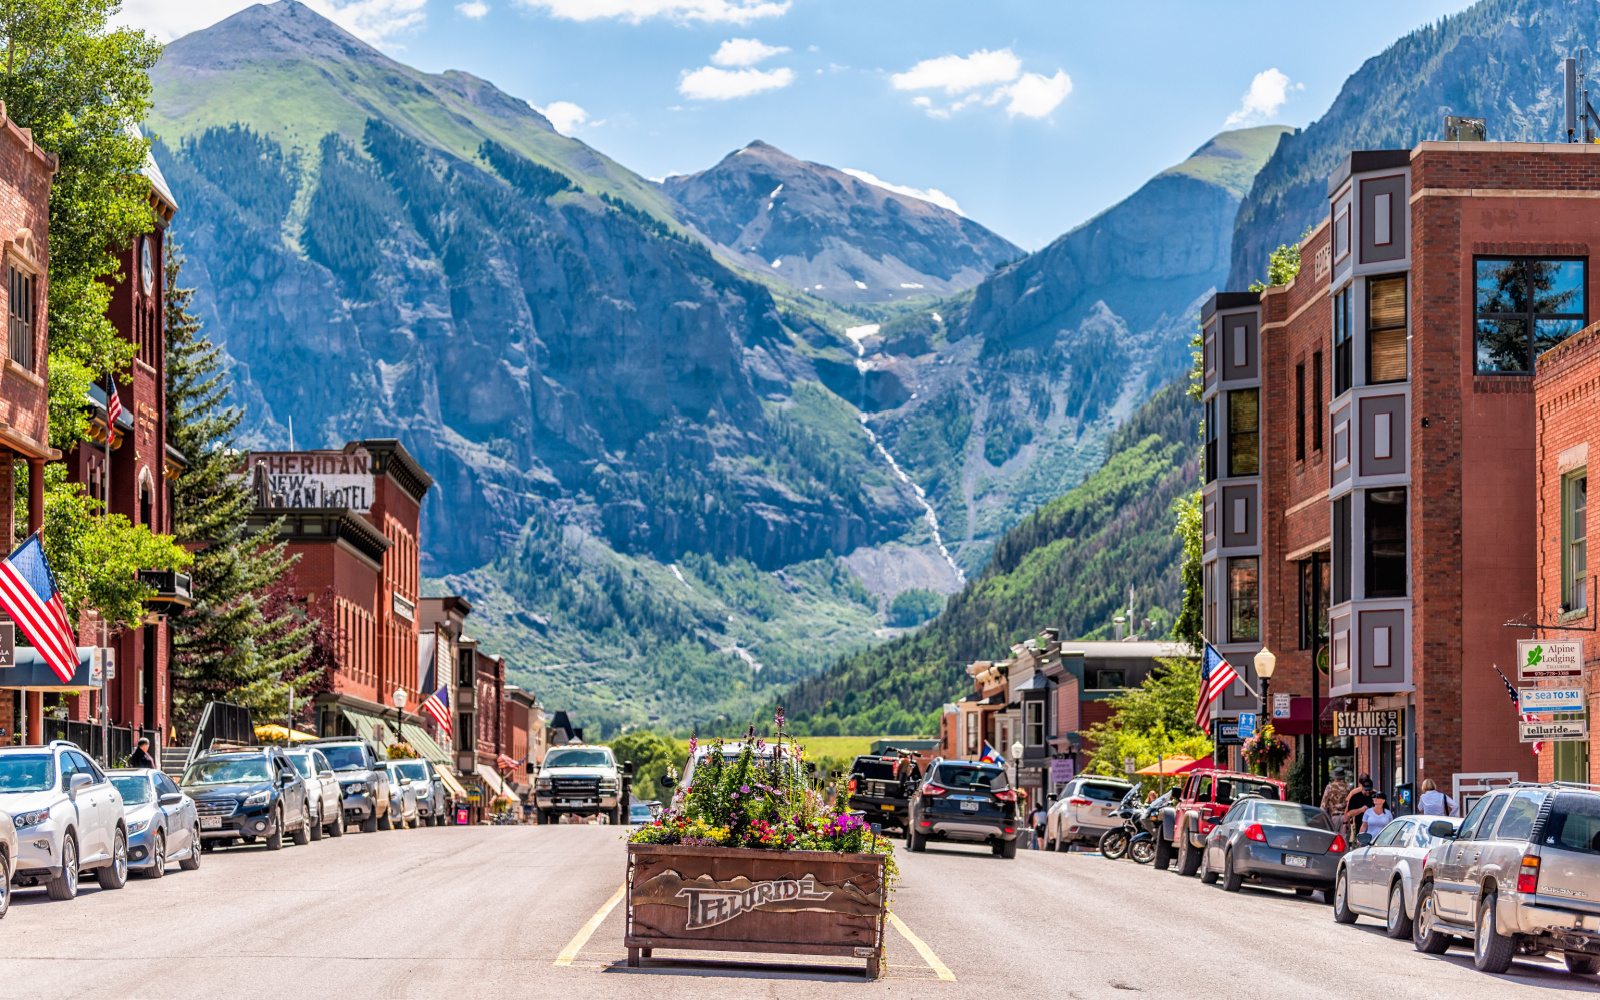 The Best & Worst Times to Visit Telluride in 2023